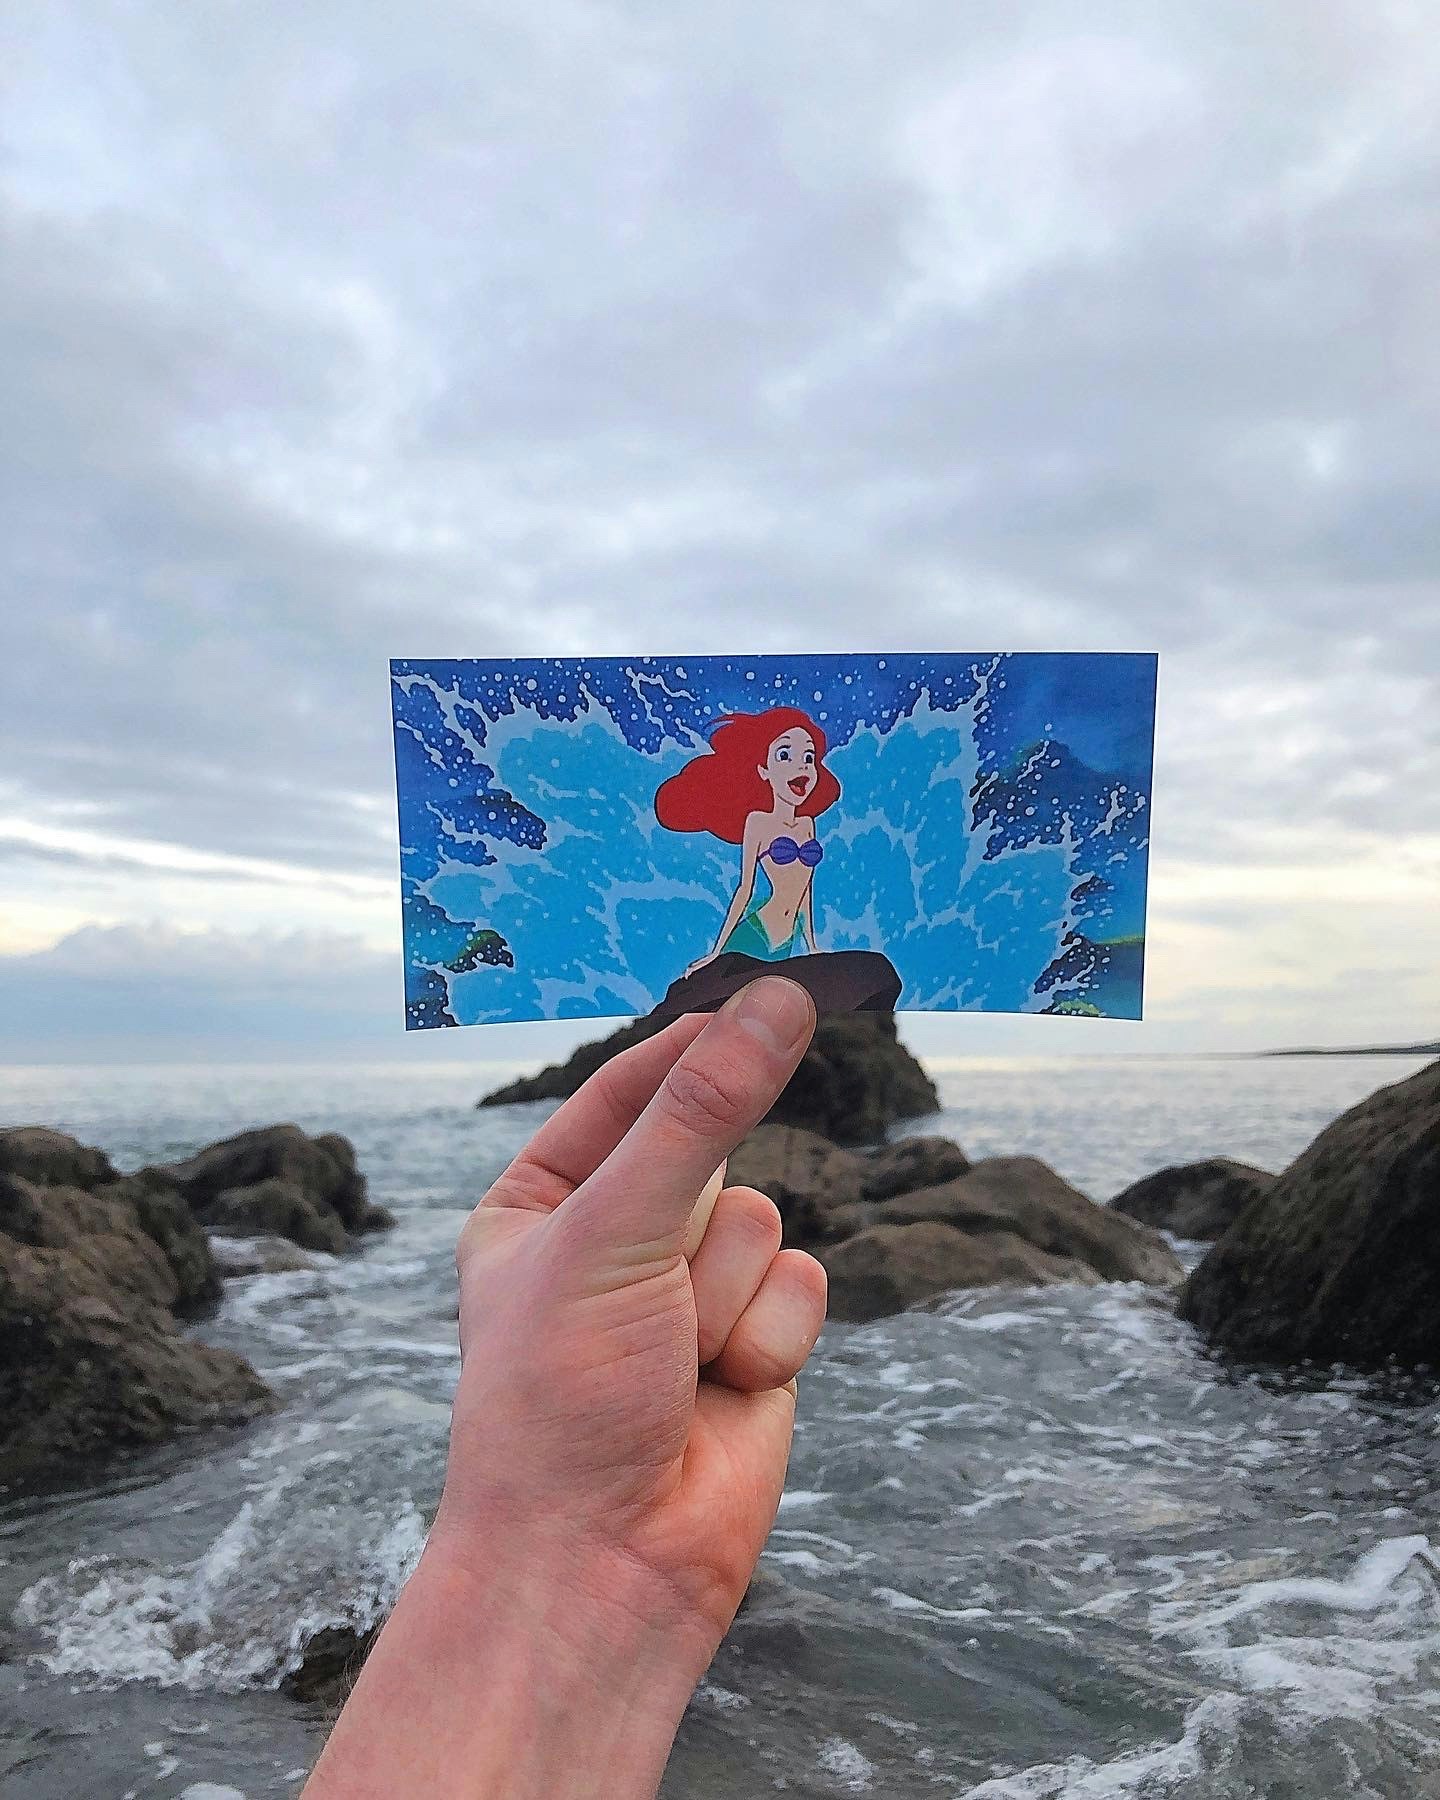 A shot taken from Disney's The Little Mermaid lined up with the sea in Denmark